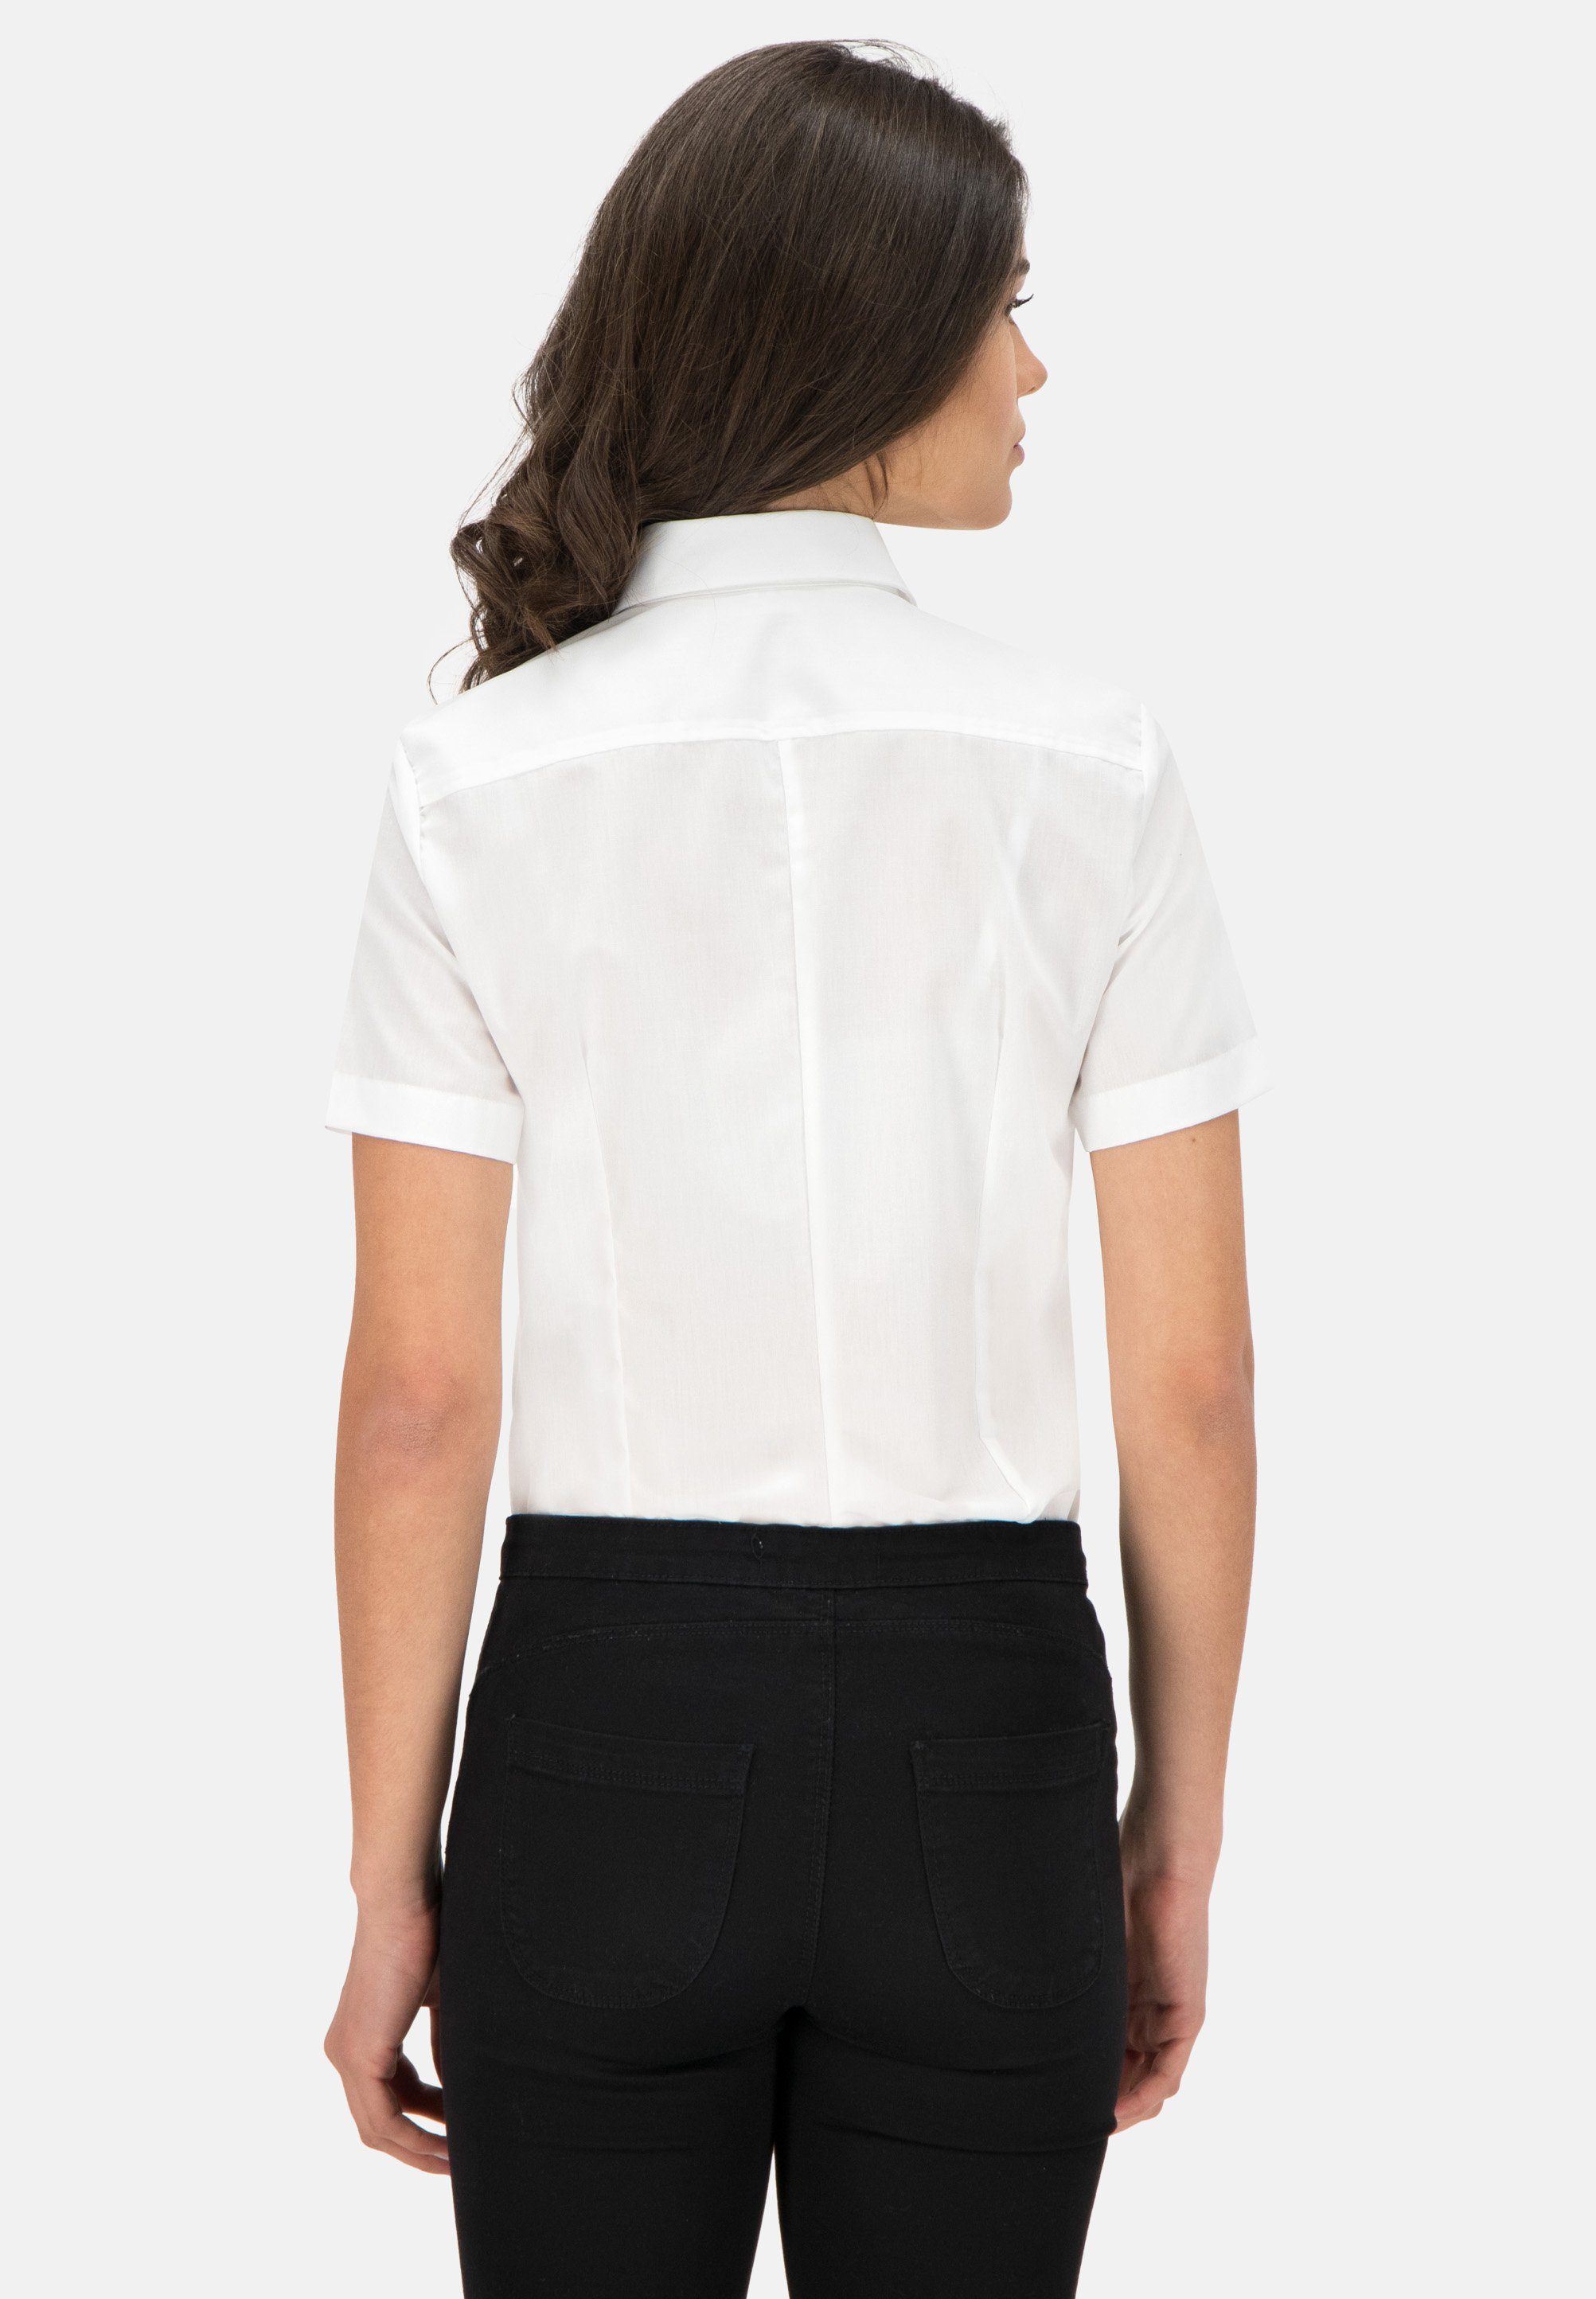 Petermann Slim in Flanellbluse moderner Sofia Fit-Passform